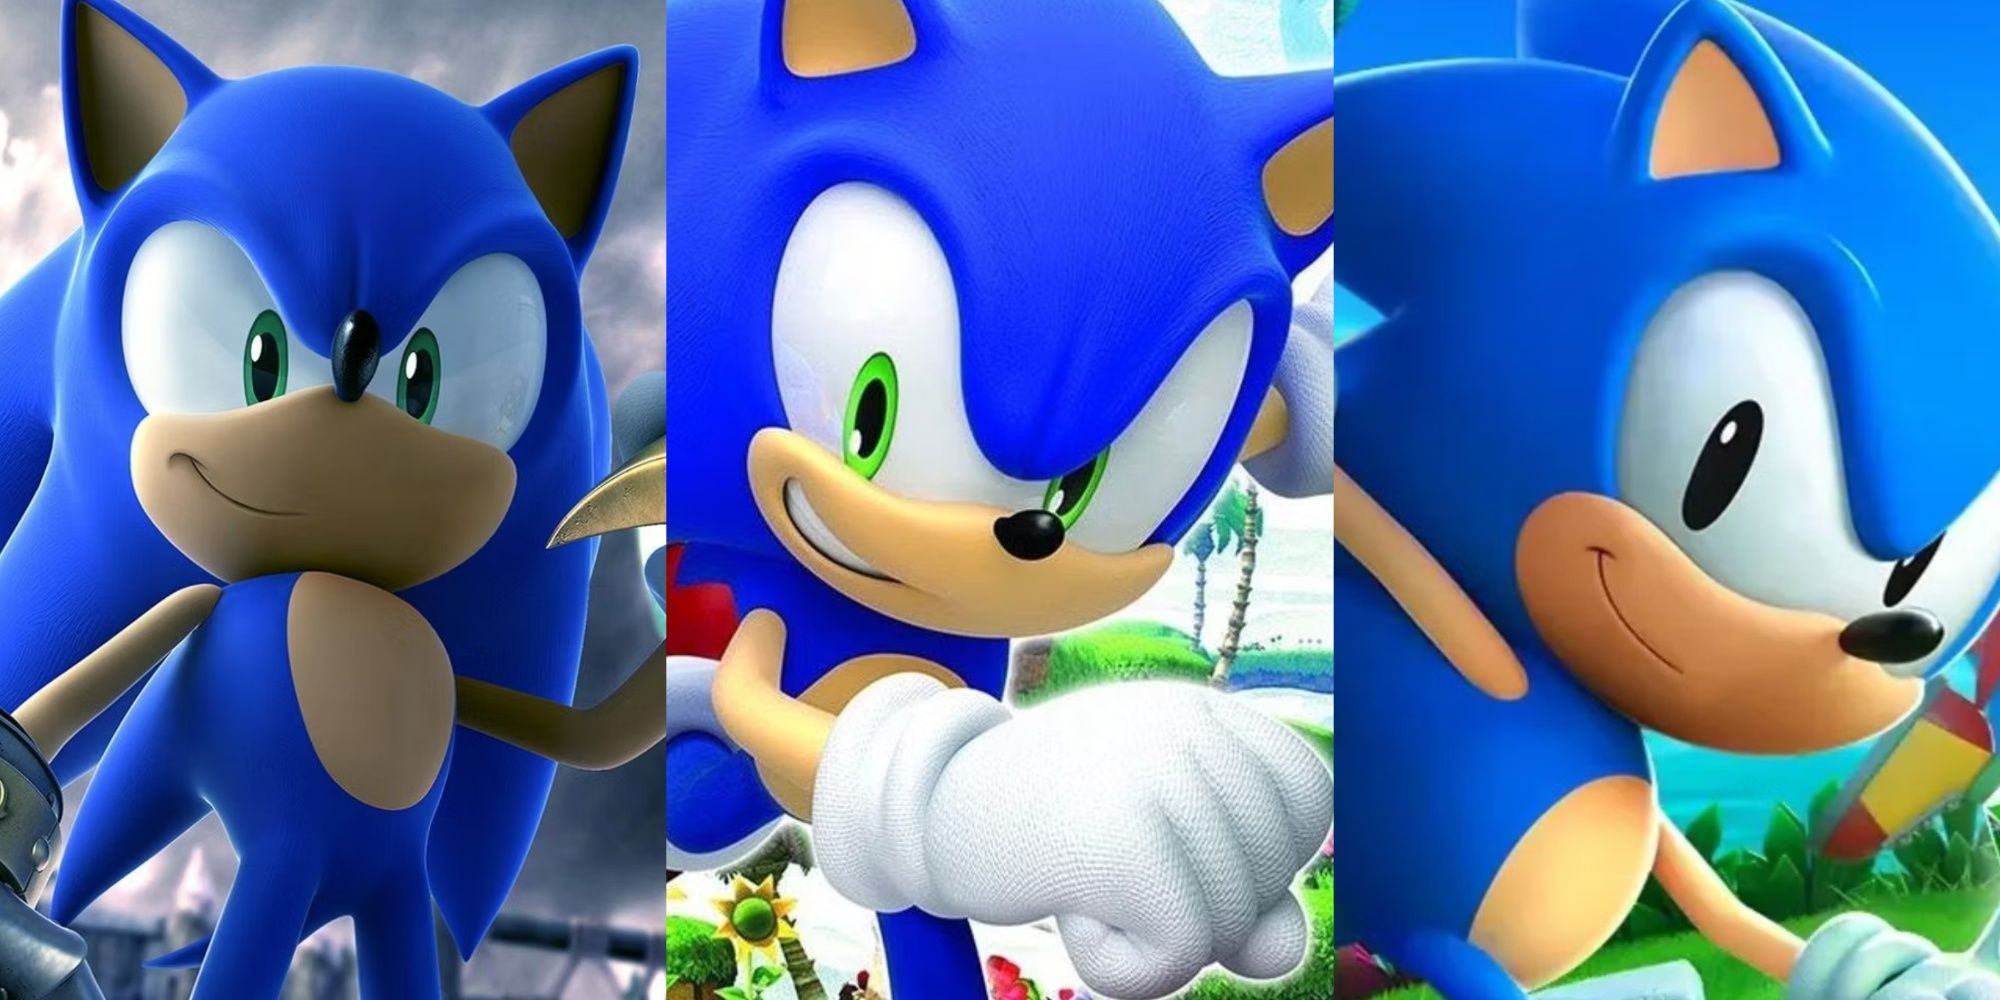 A collage showing three close shots of Sonic in three different games: Black Knight, Generations, and Superstars.